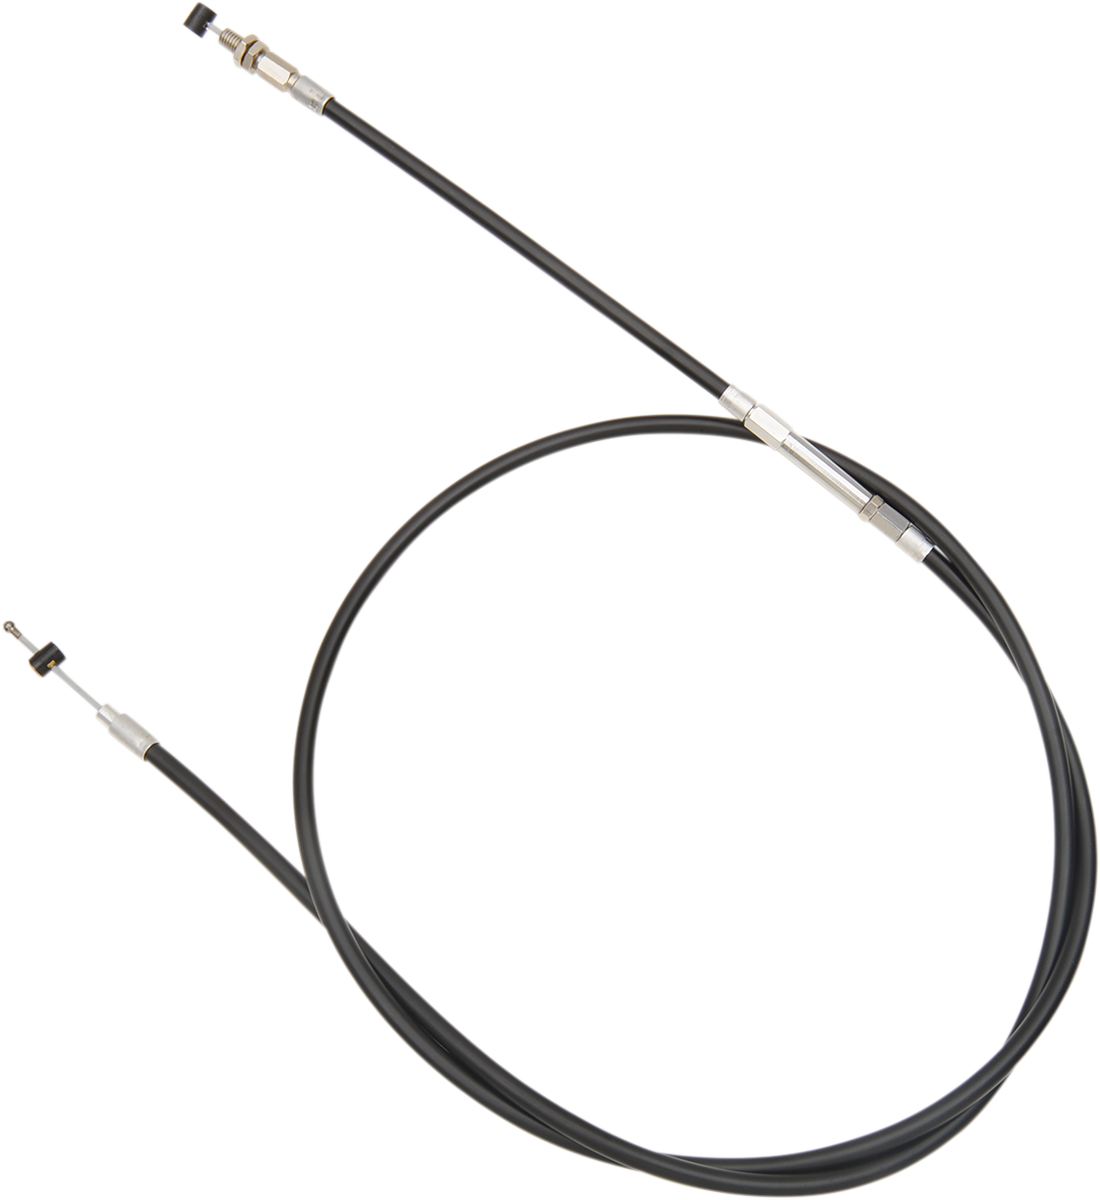 BARNETT Clutch Cable - +6" - Indian - Black 101-40-10005-06